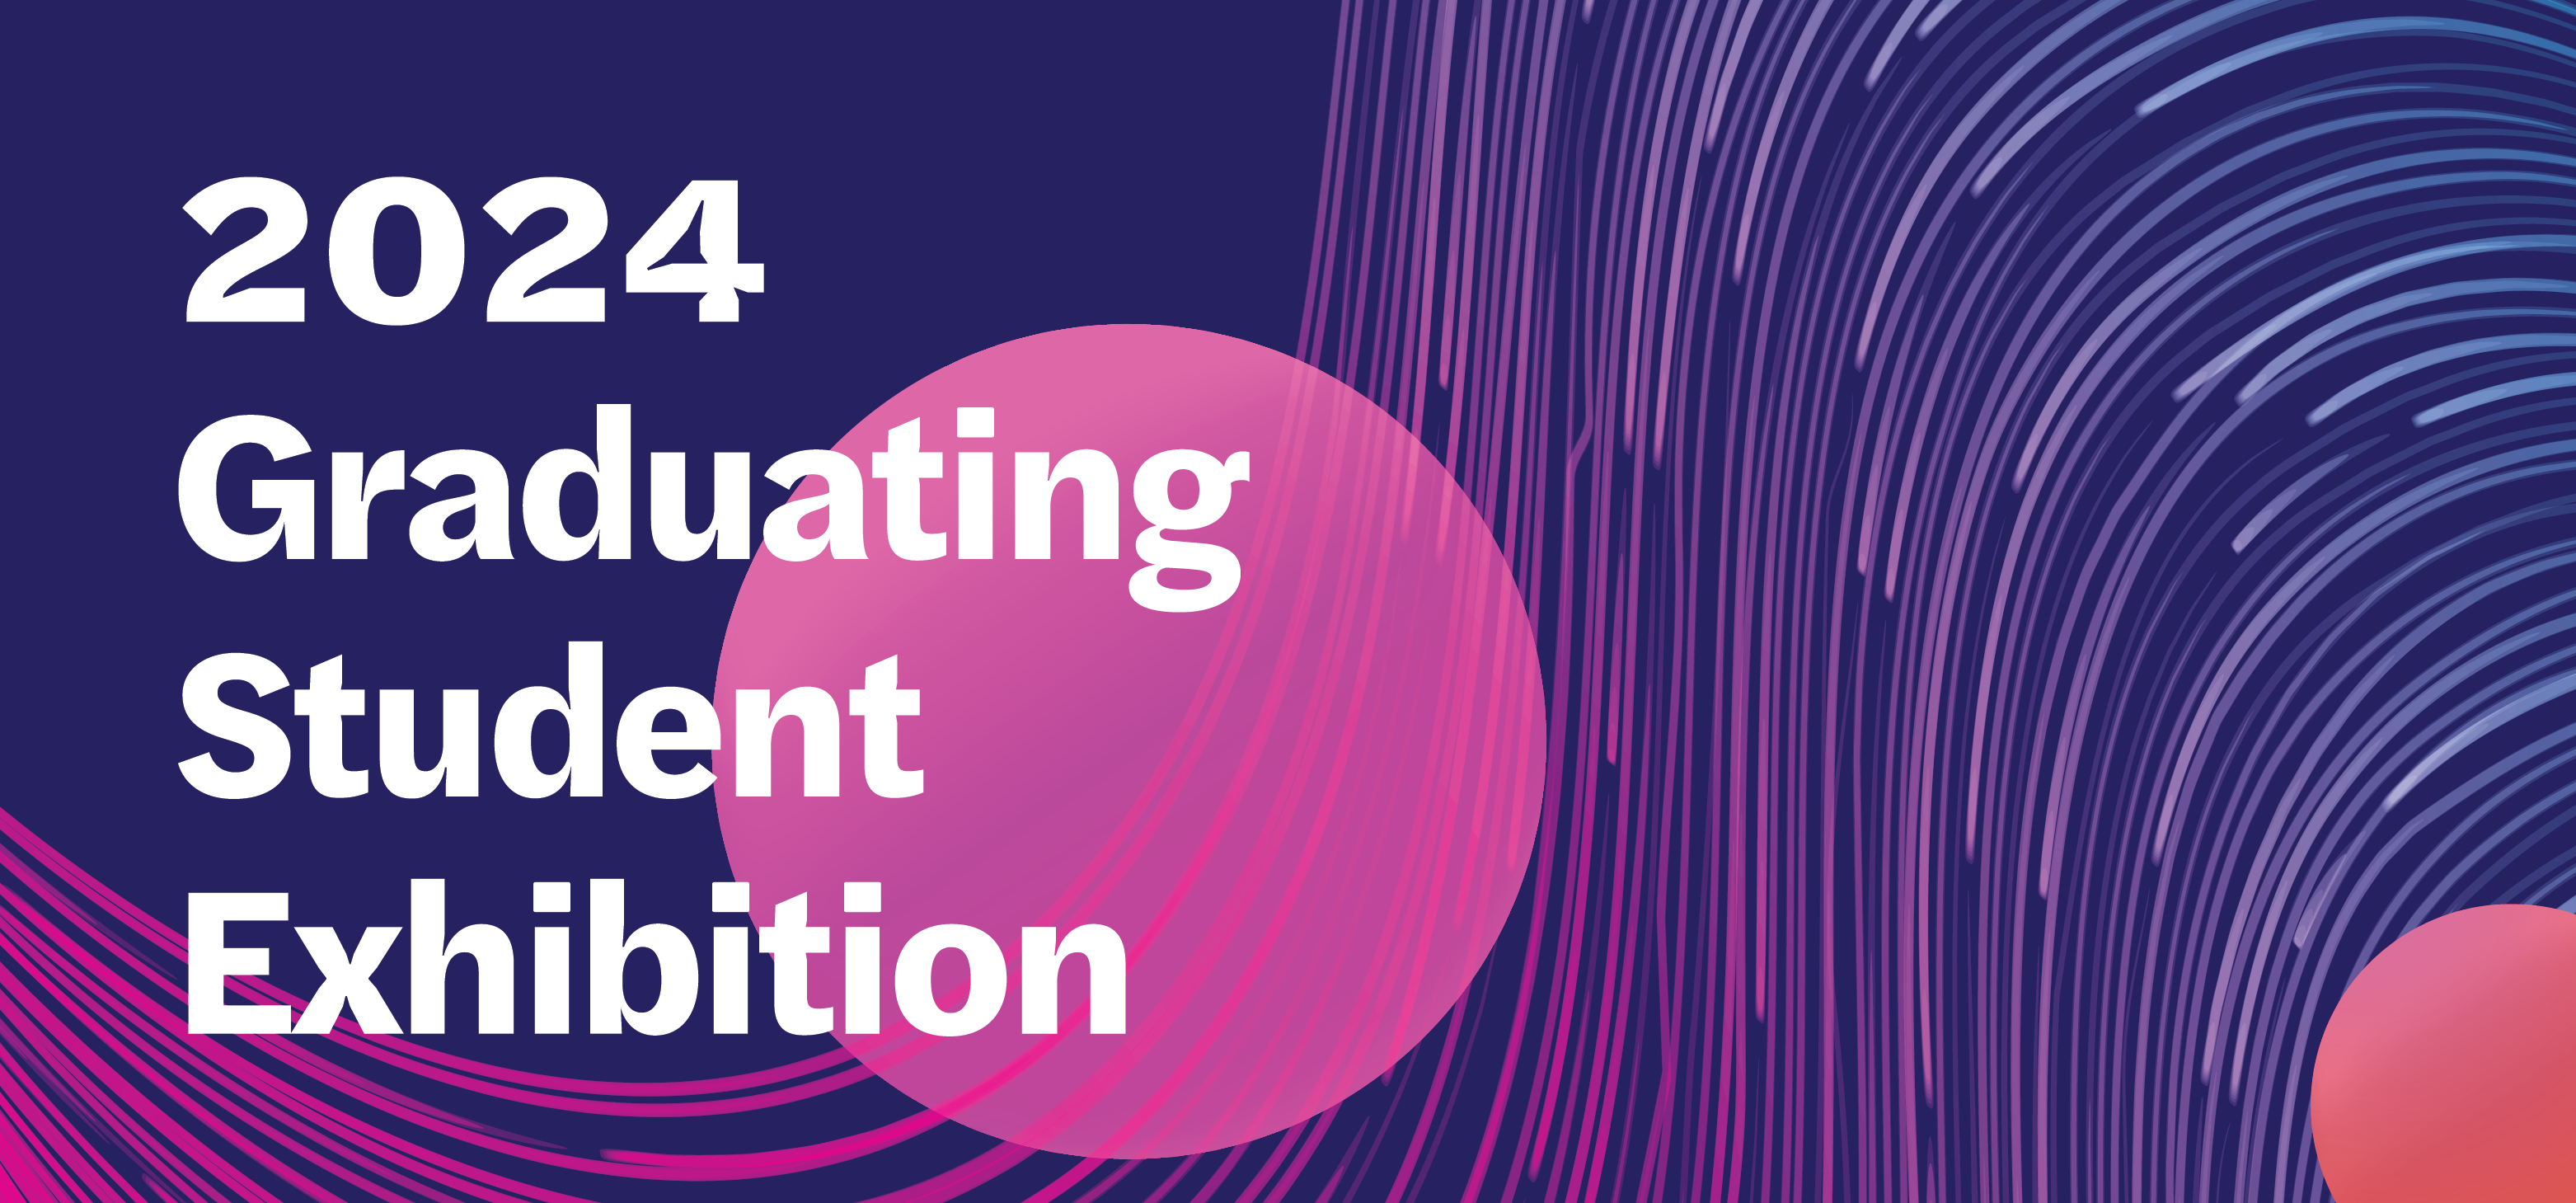 Banner for 2024 Graduating Student Exhibition with pink graphic and purple background